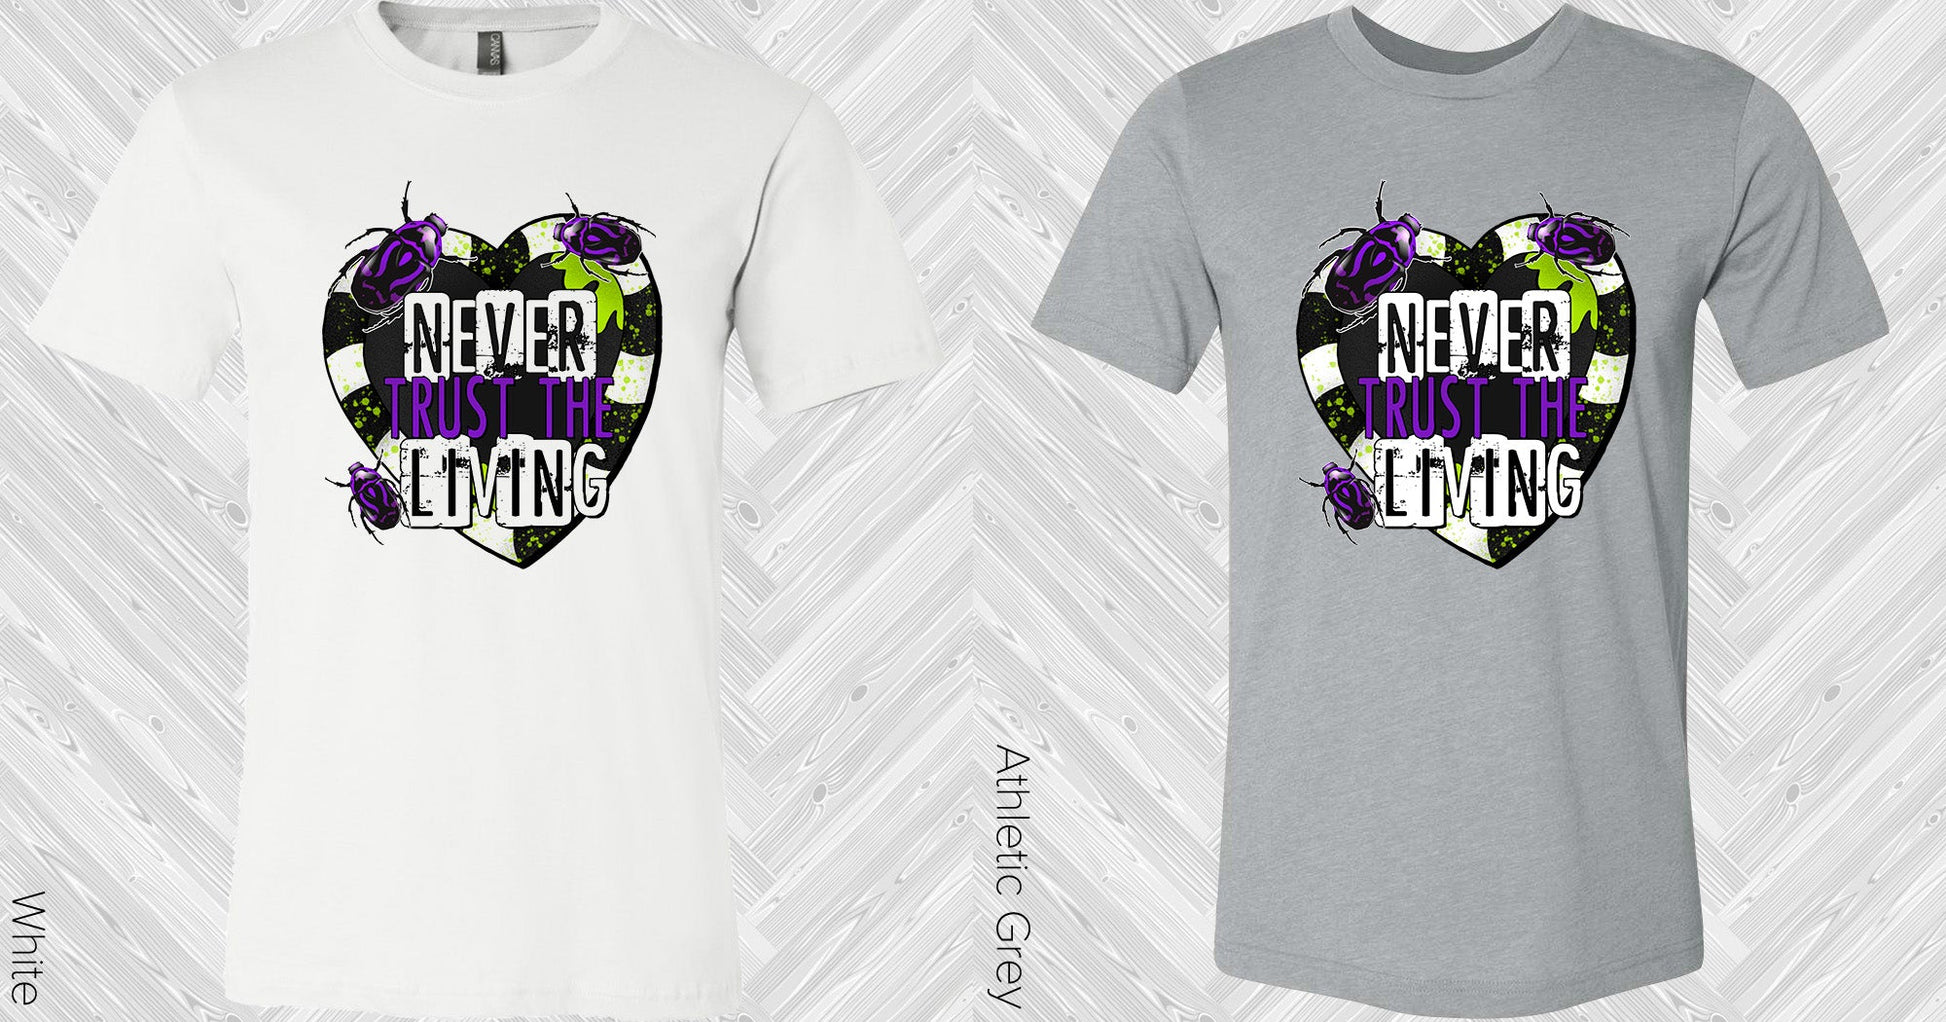 Never Trust The Living Graphic Tee Graphic Tee